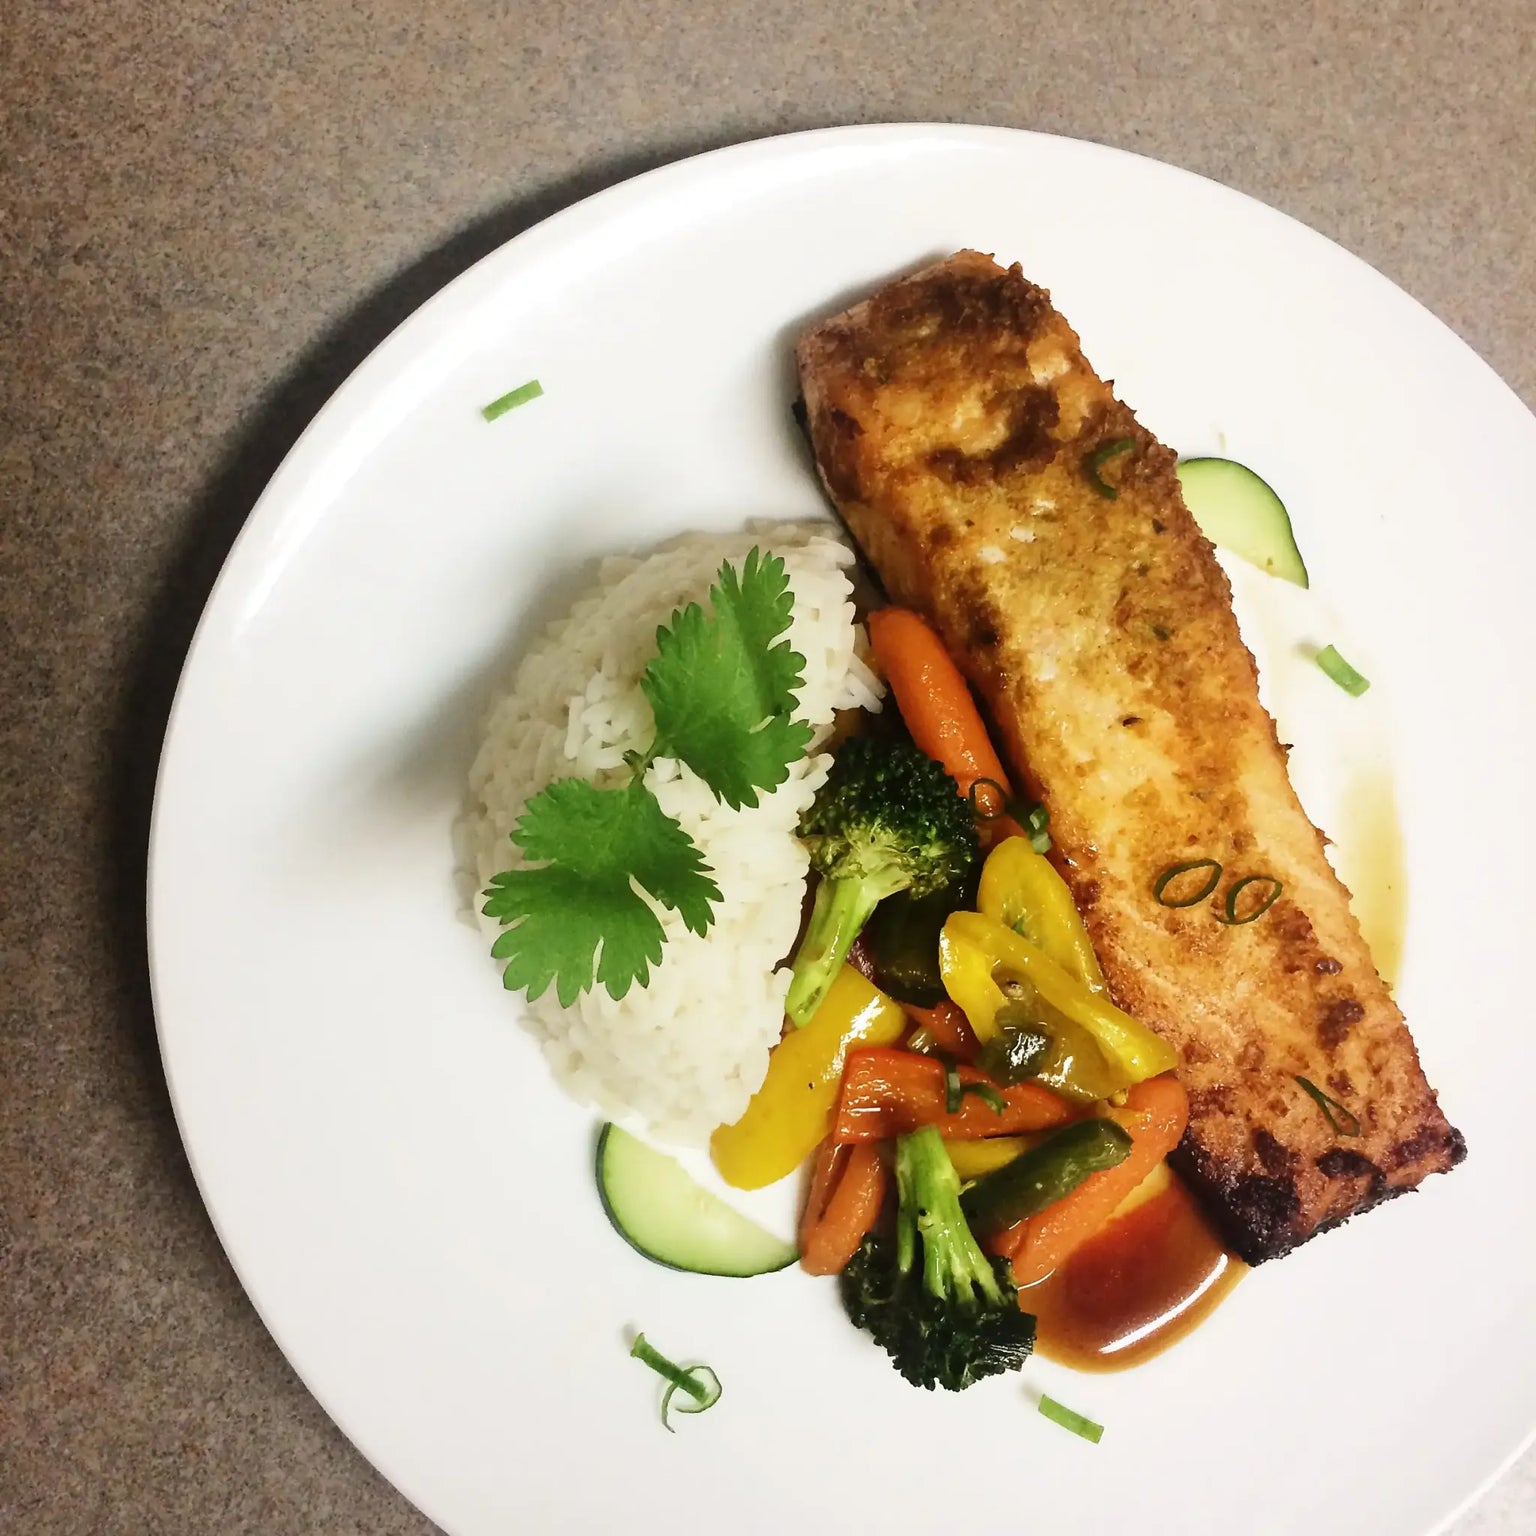 Baked Spicy And Ginger Salmon With Vegetables In Stir Fry Sauce